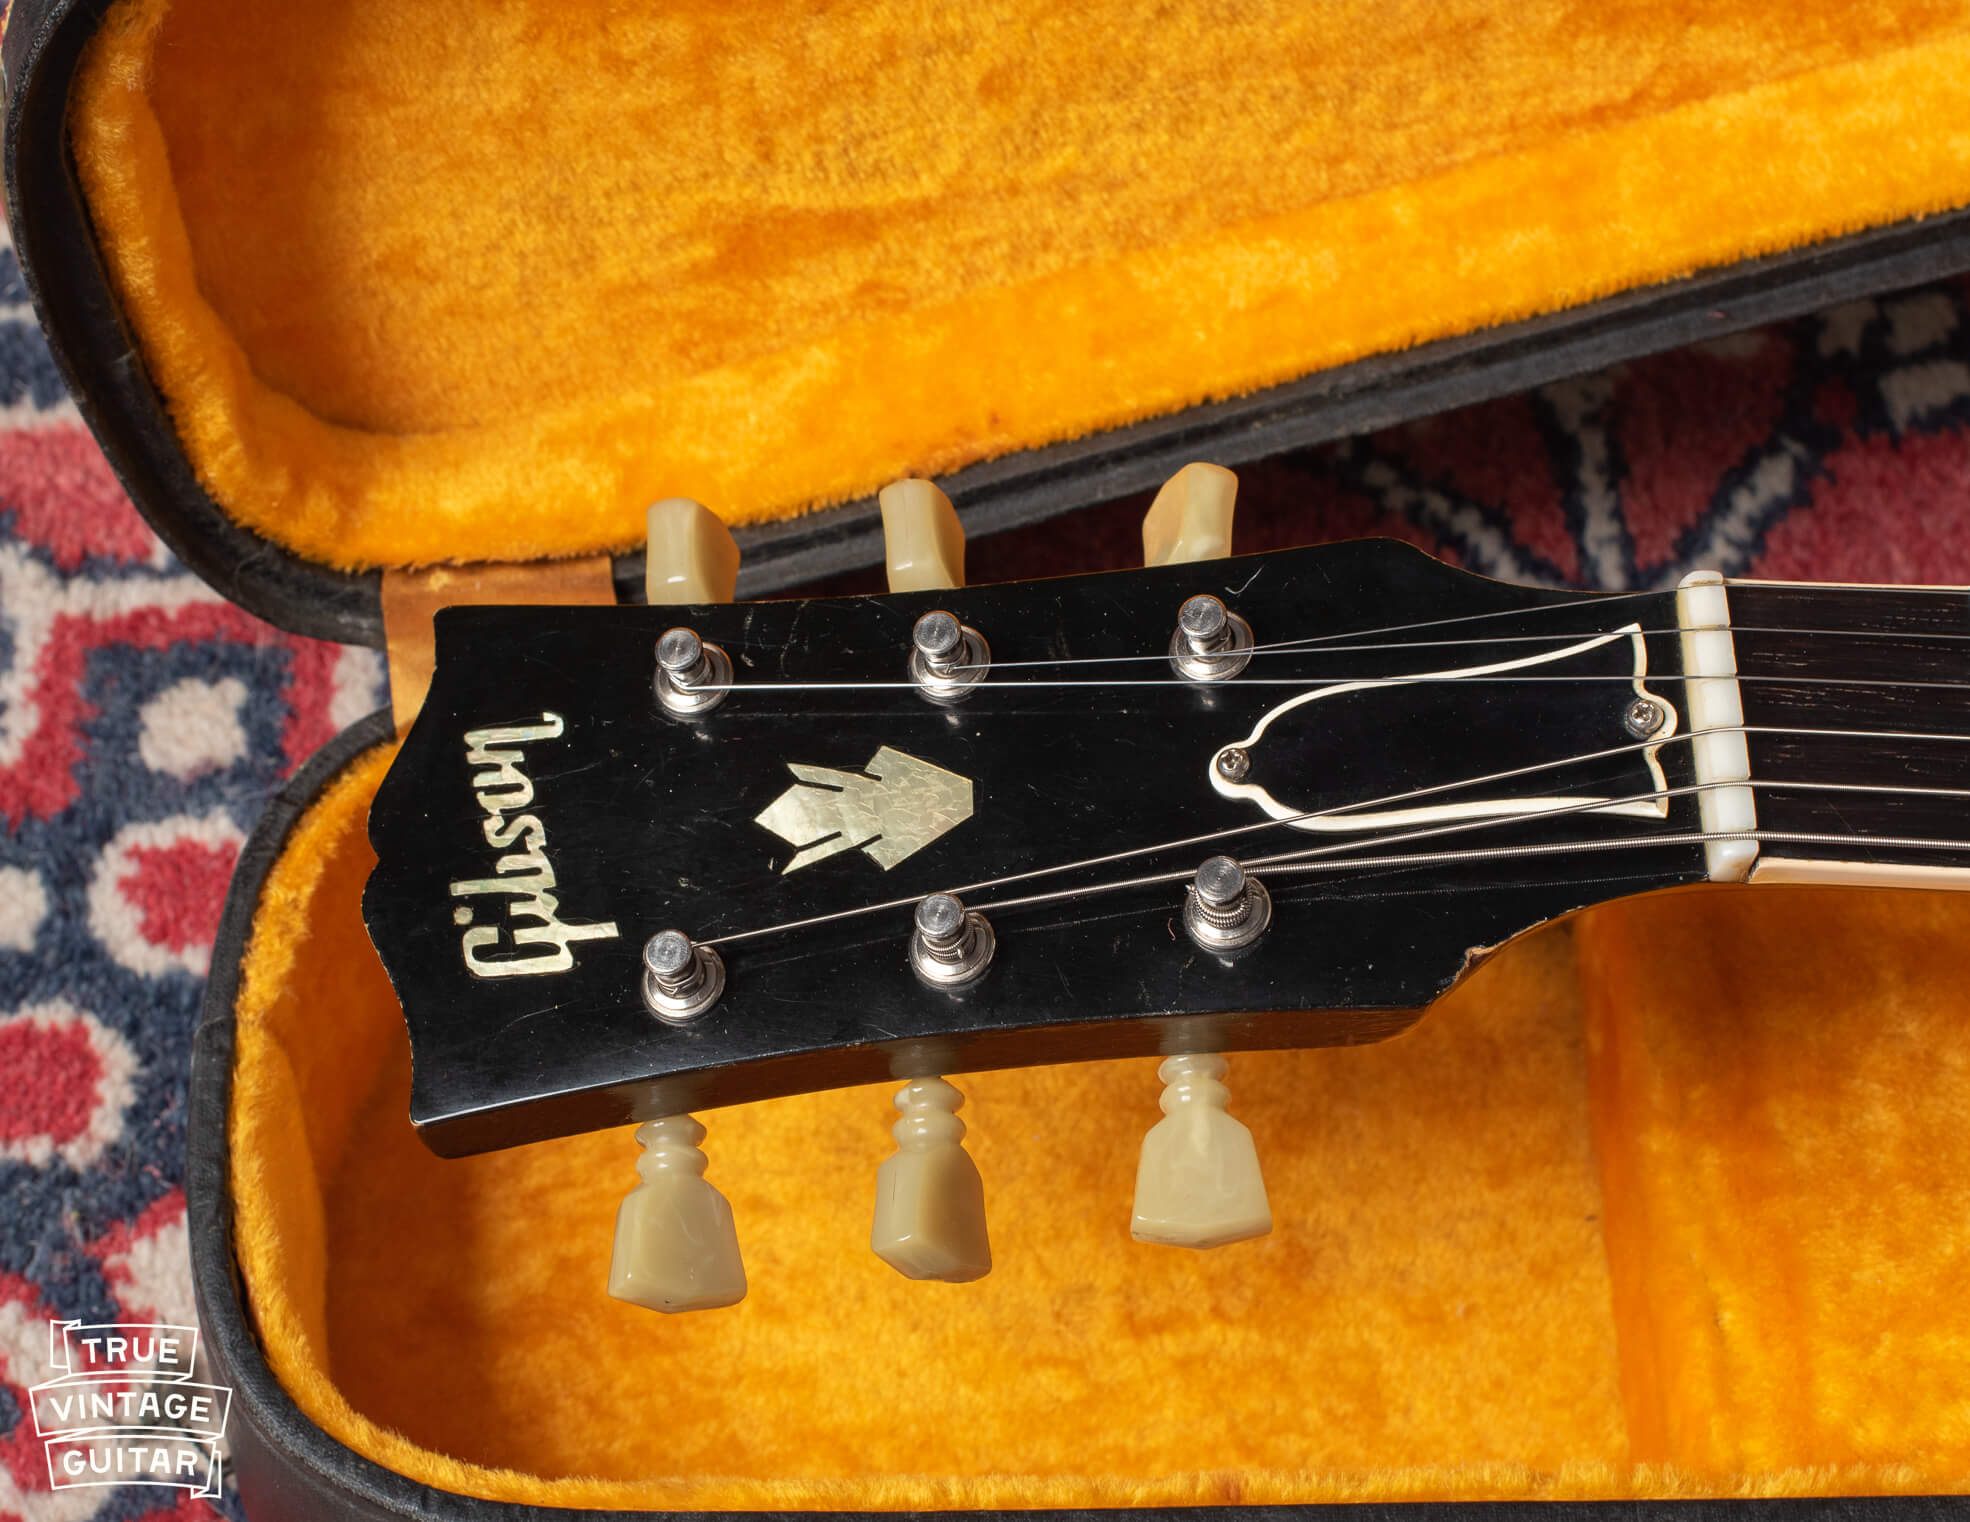 1964 Gibson ES-335 headstock and neck